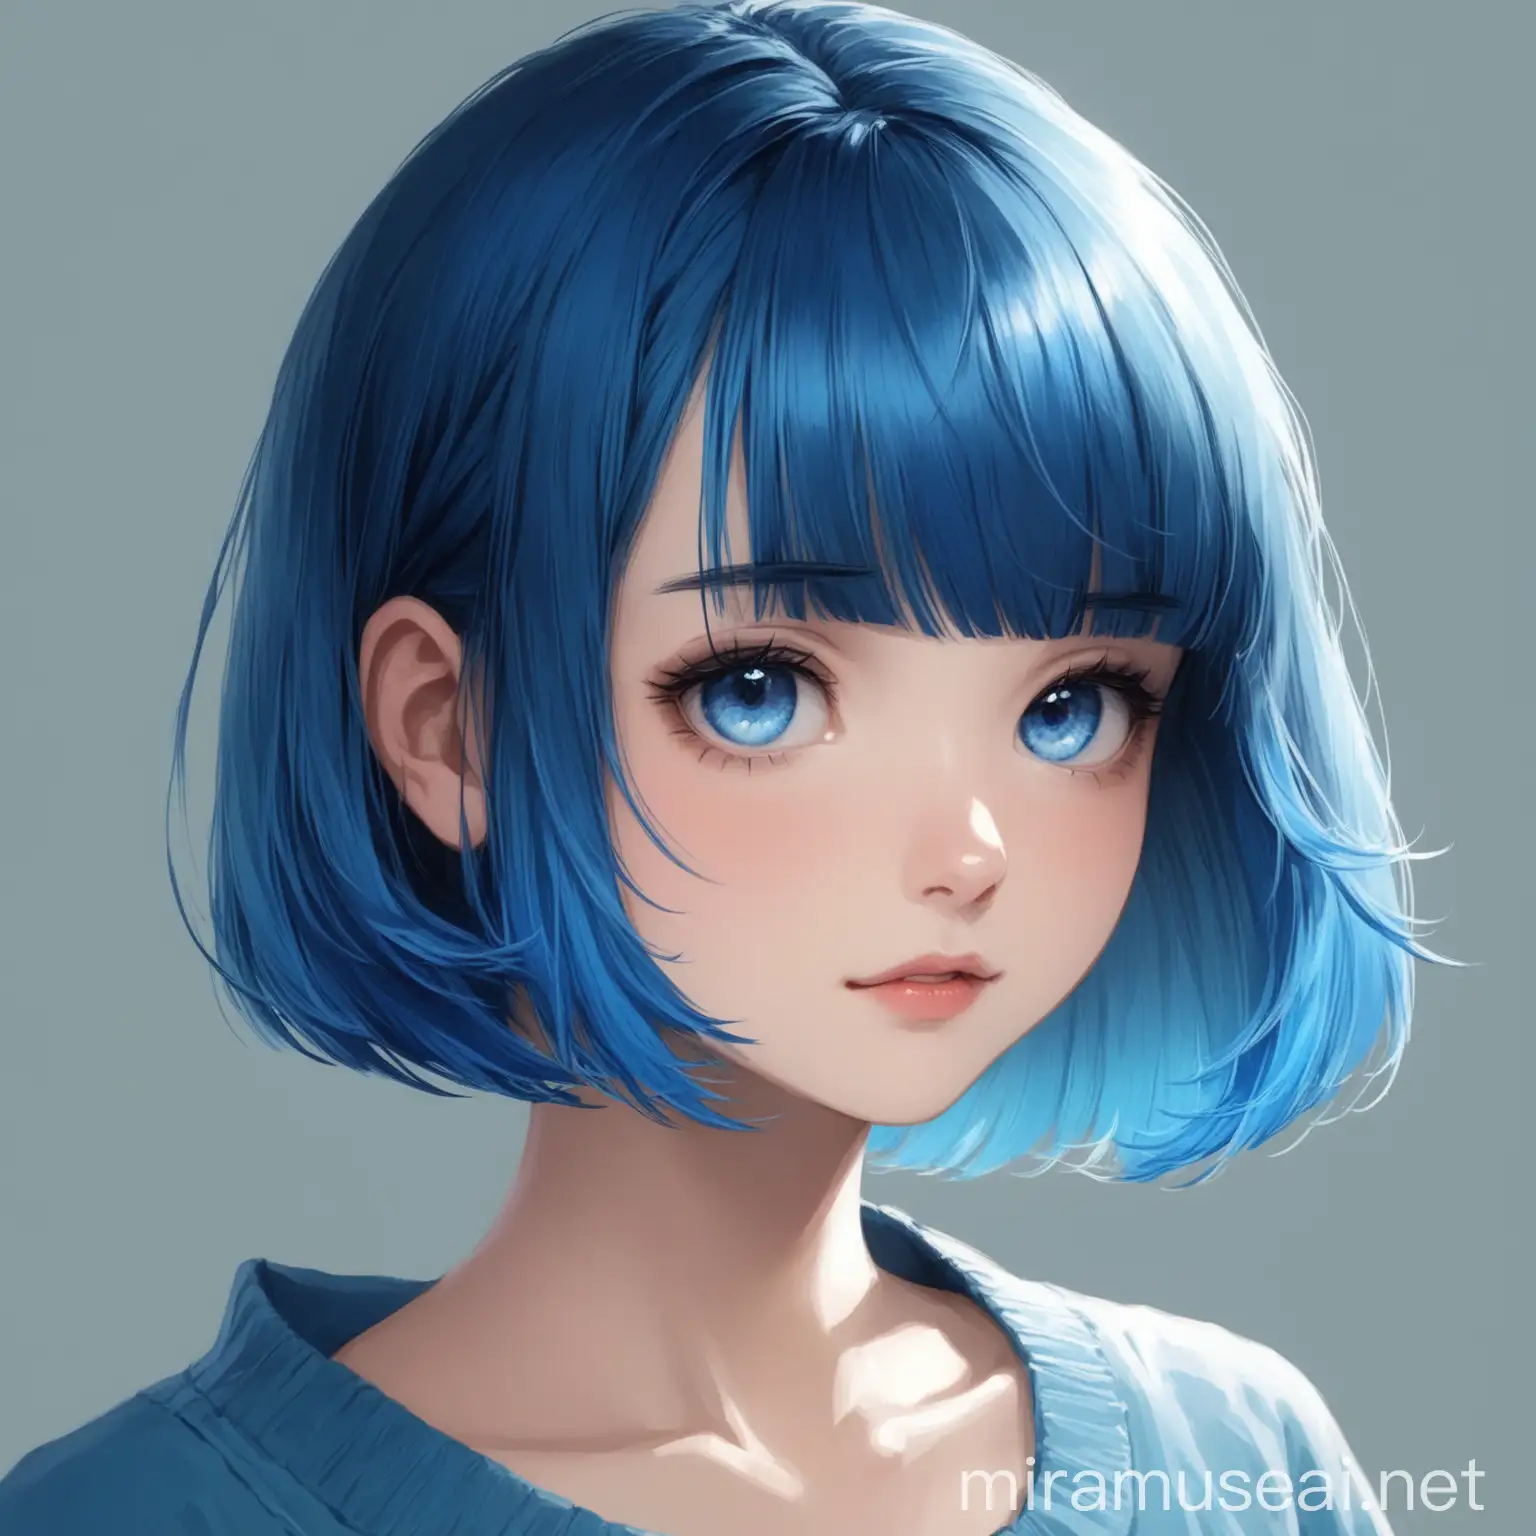 Portrait of a Pretty Girl with Short Blue Hair and Bangs